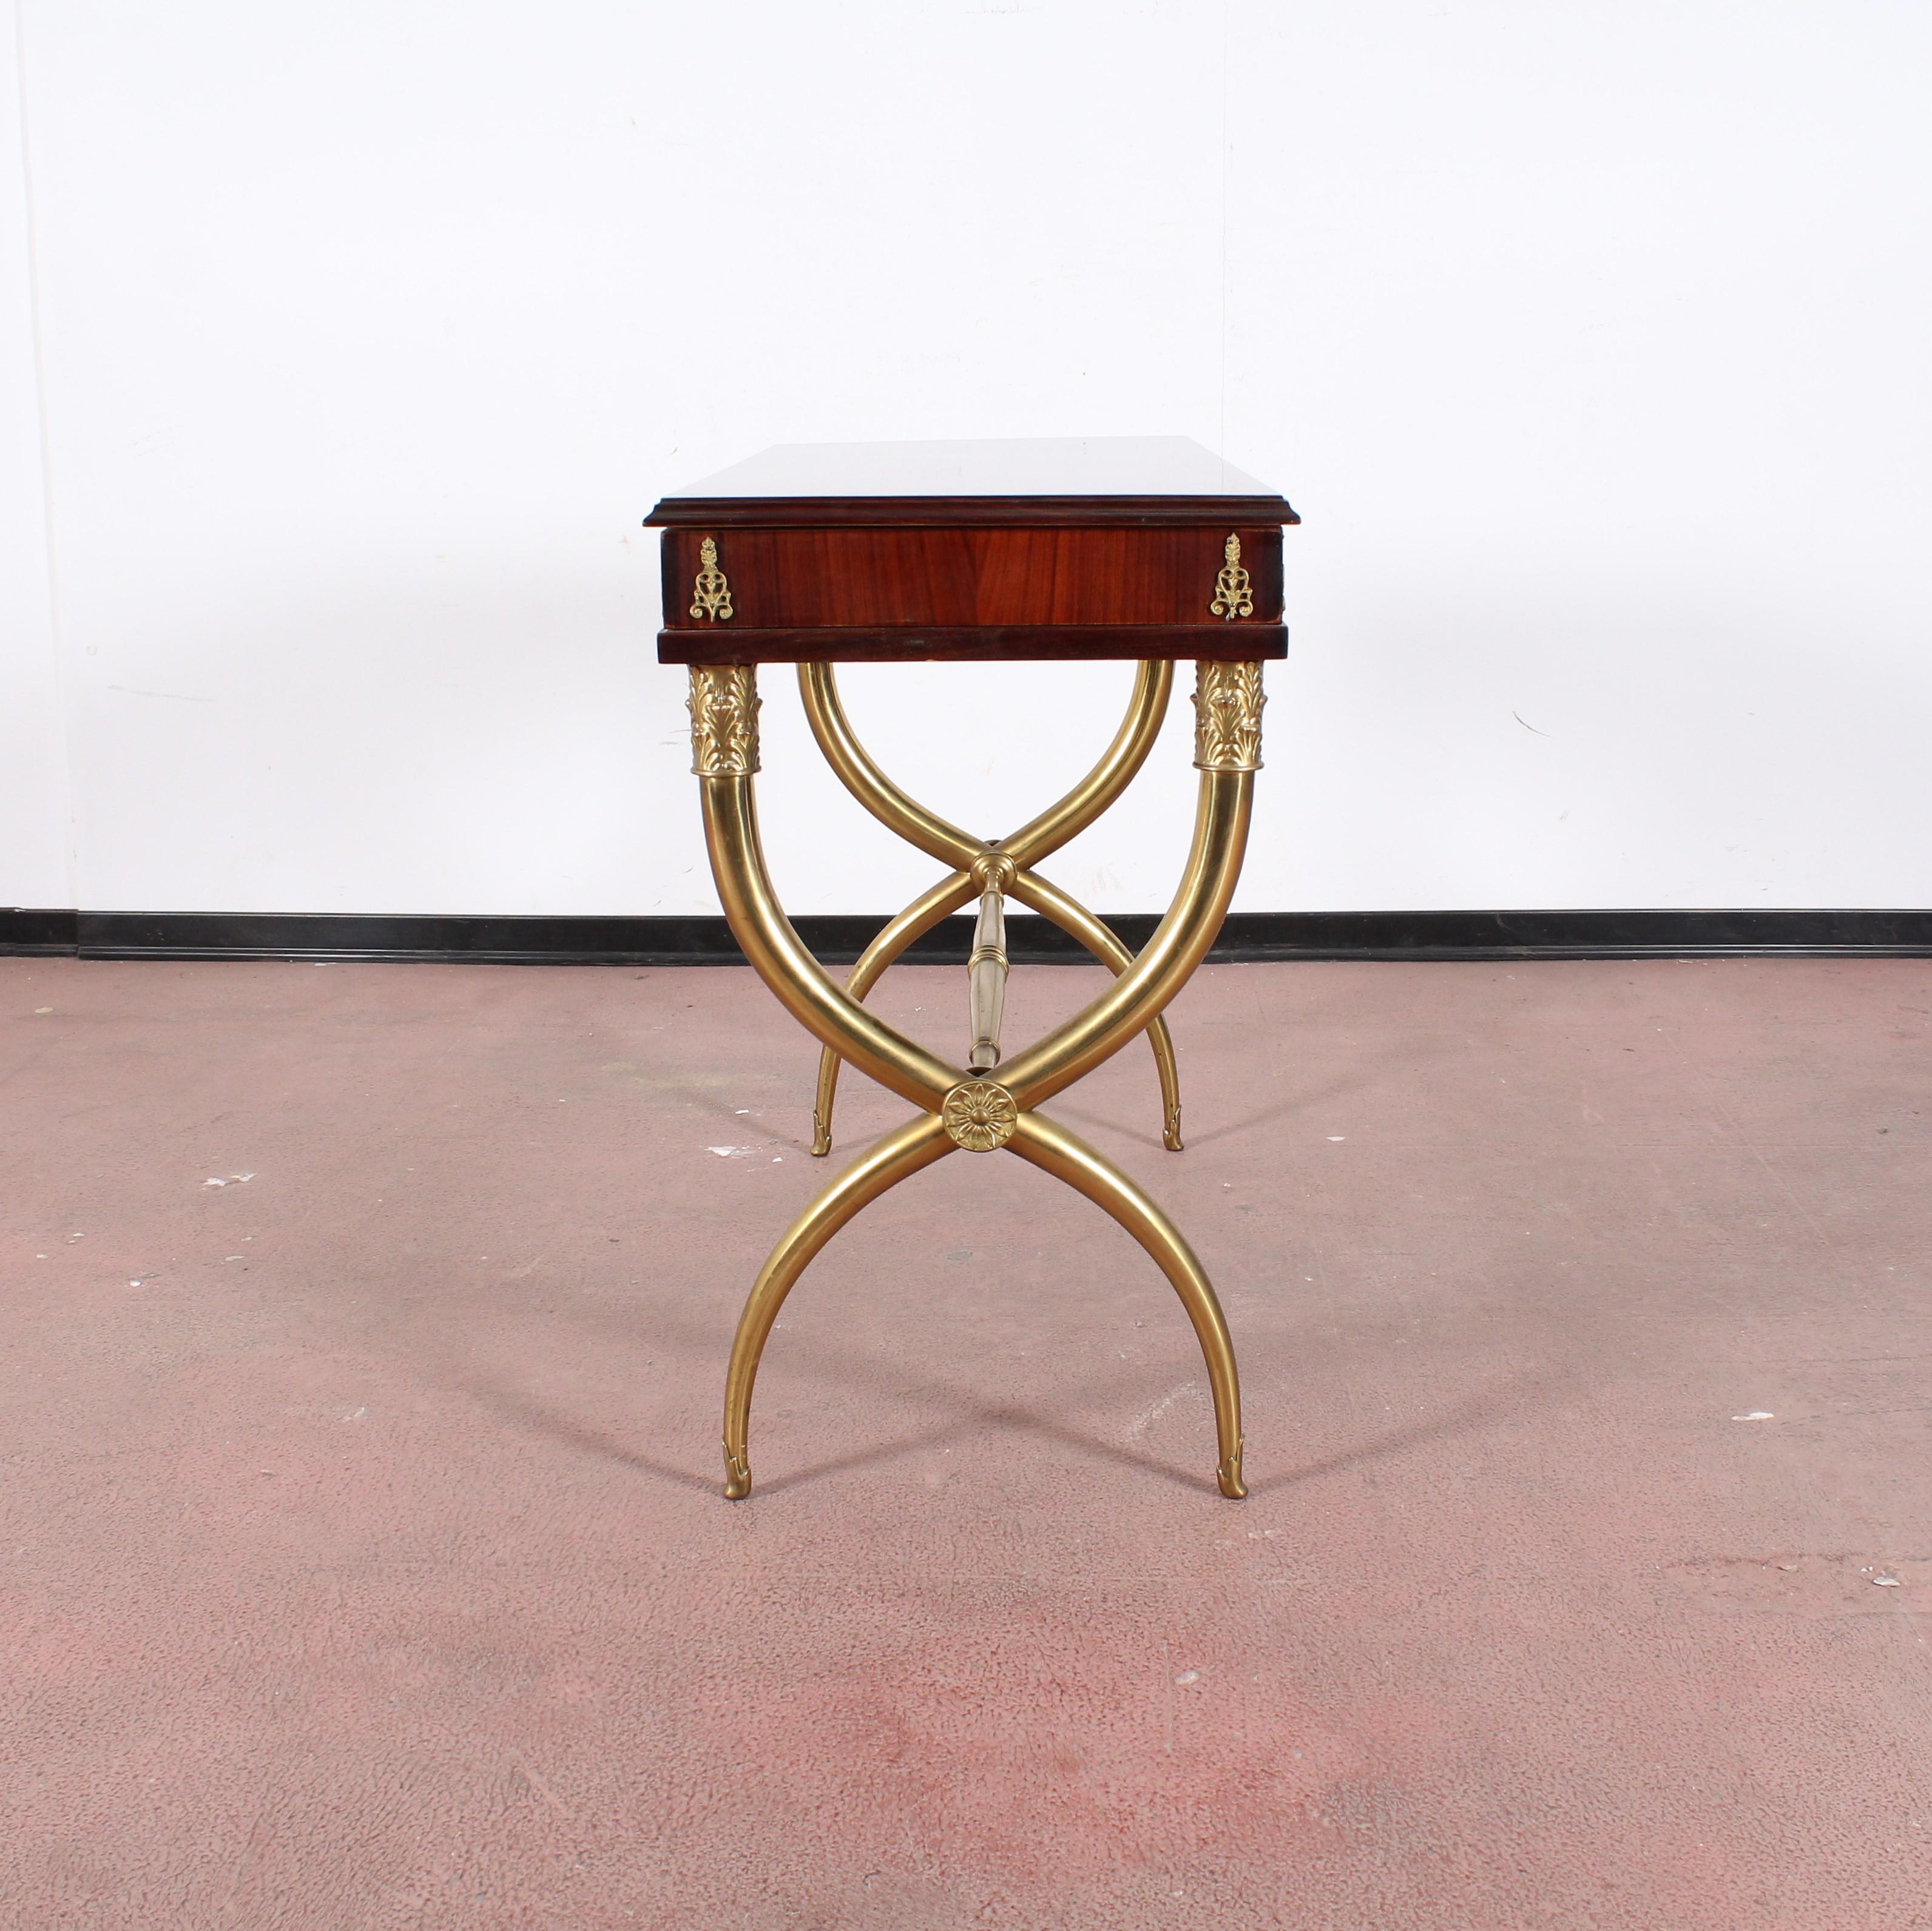 Midcentury Gio Ponti Wood and Brass Console Table with Top Container 1950s Italy 2